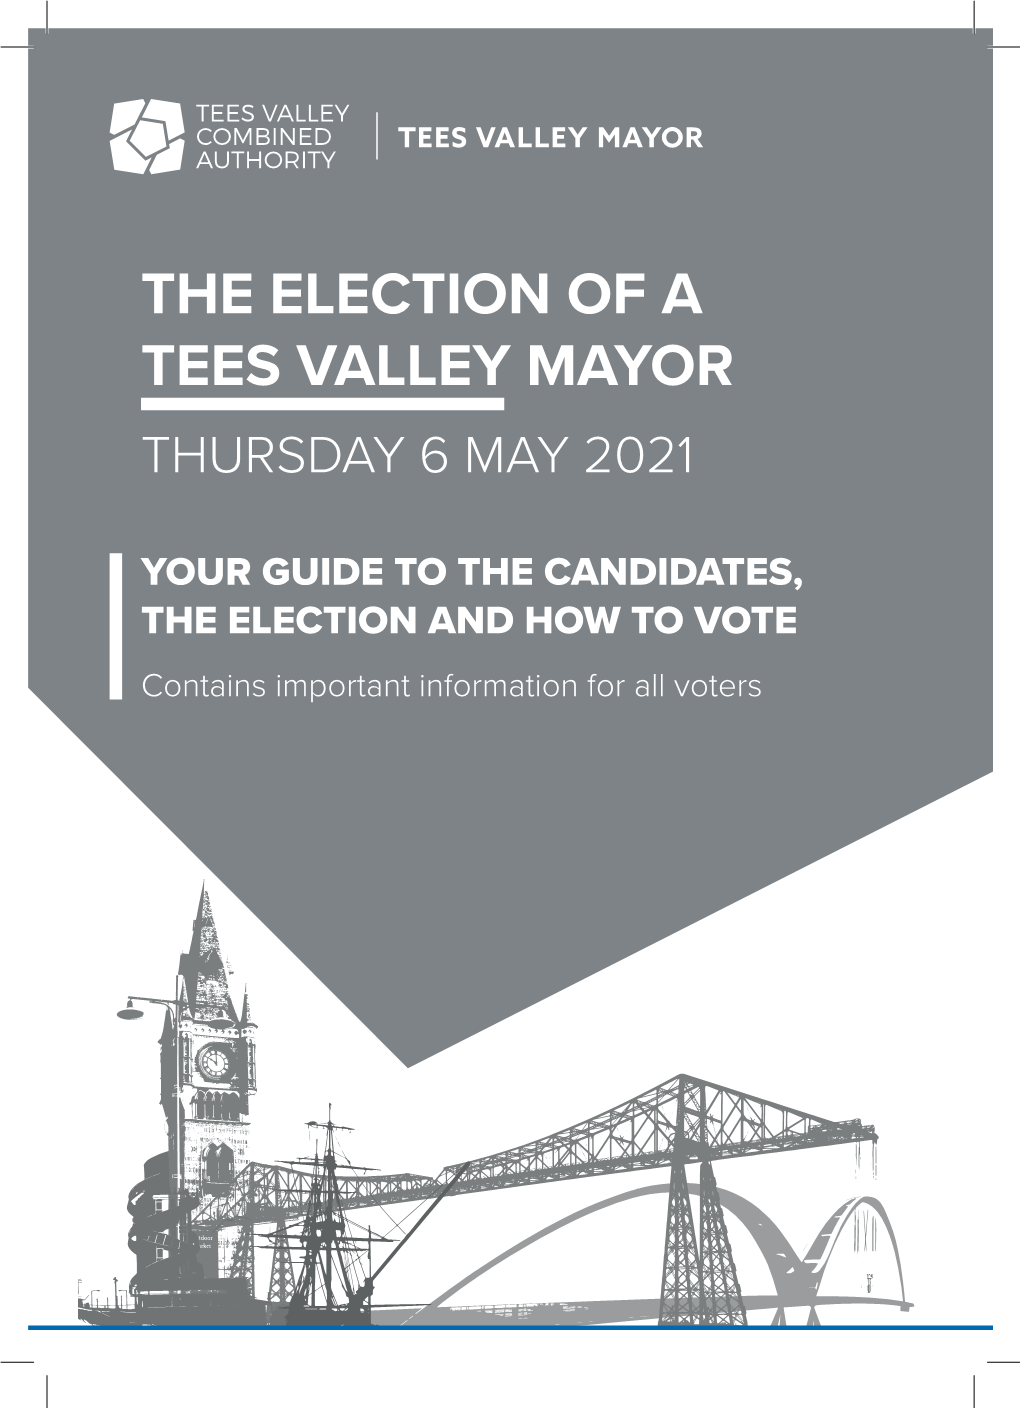 The Election of a Tees Valley Mayor Thursday 6 May 2021